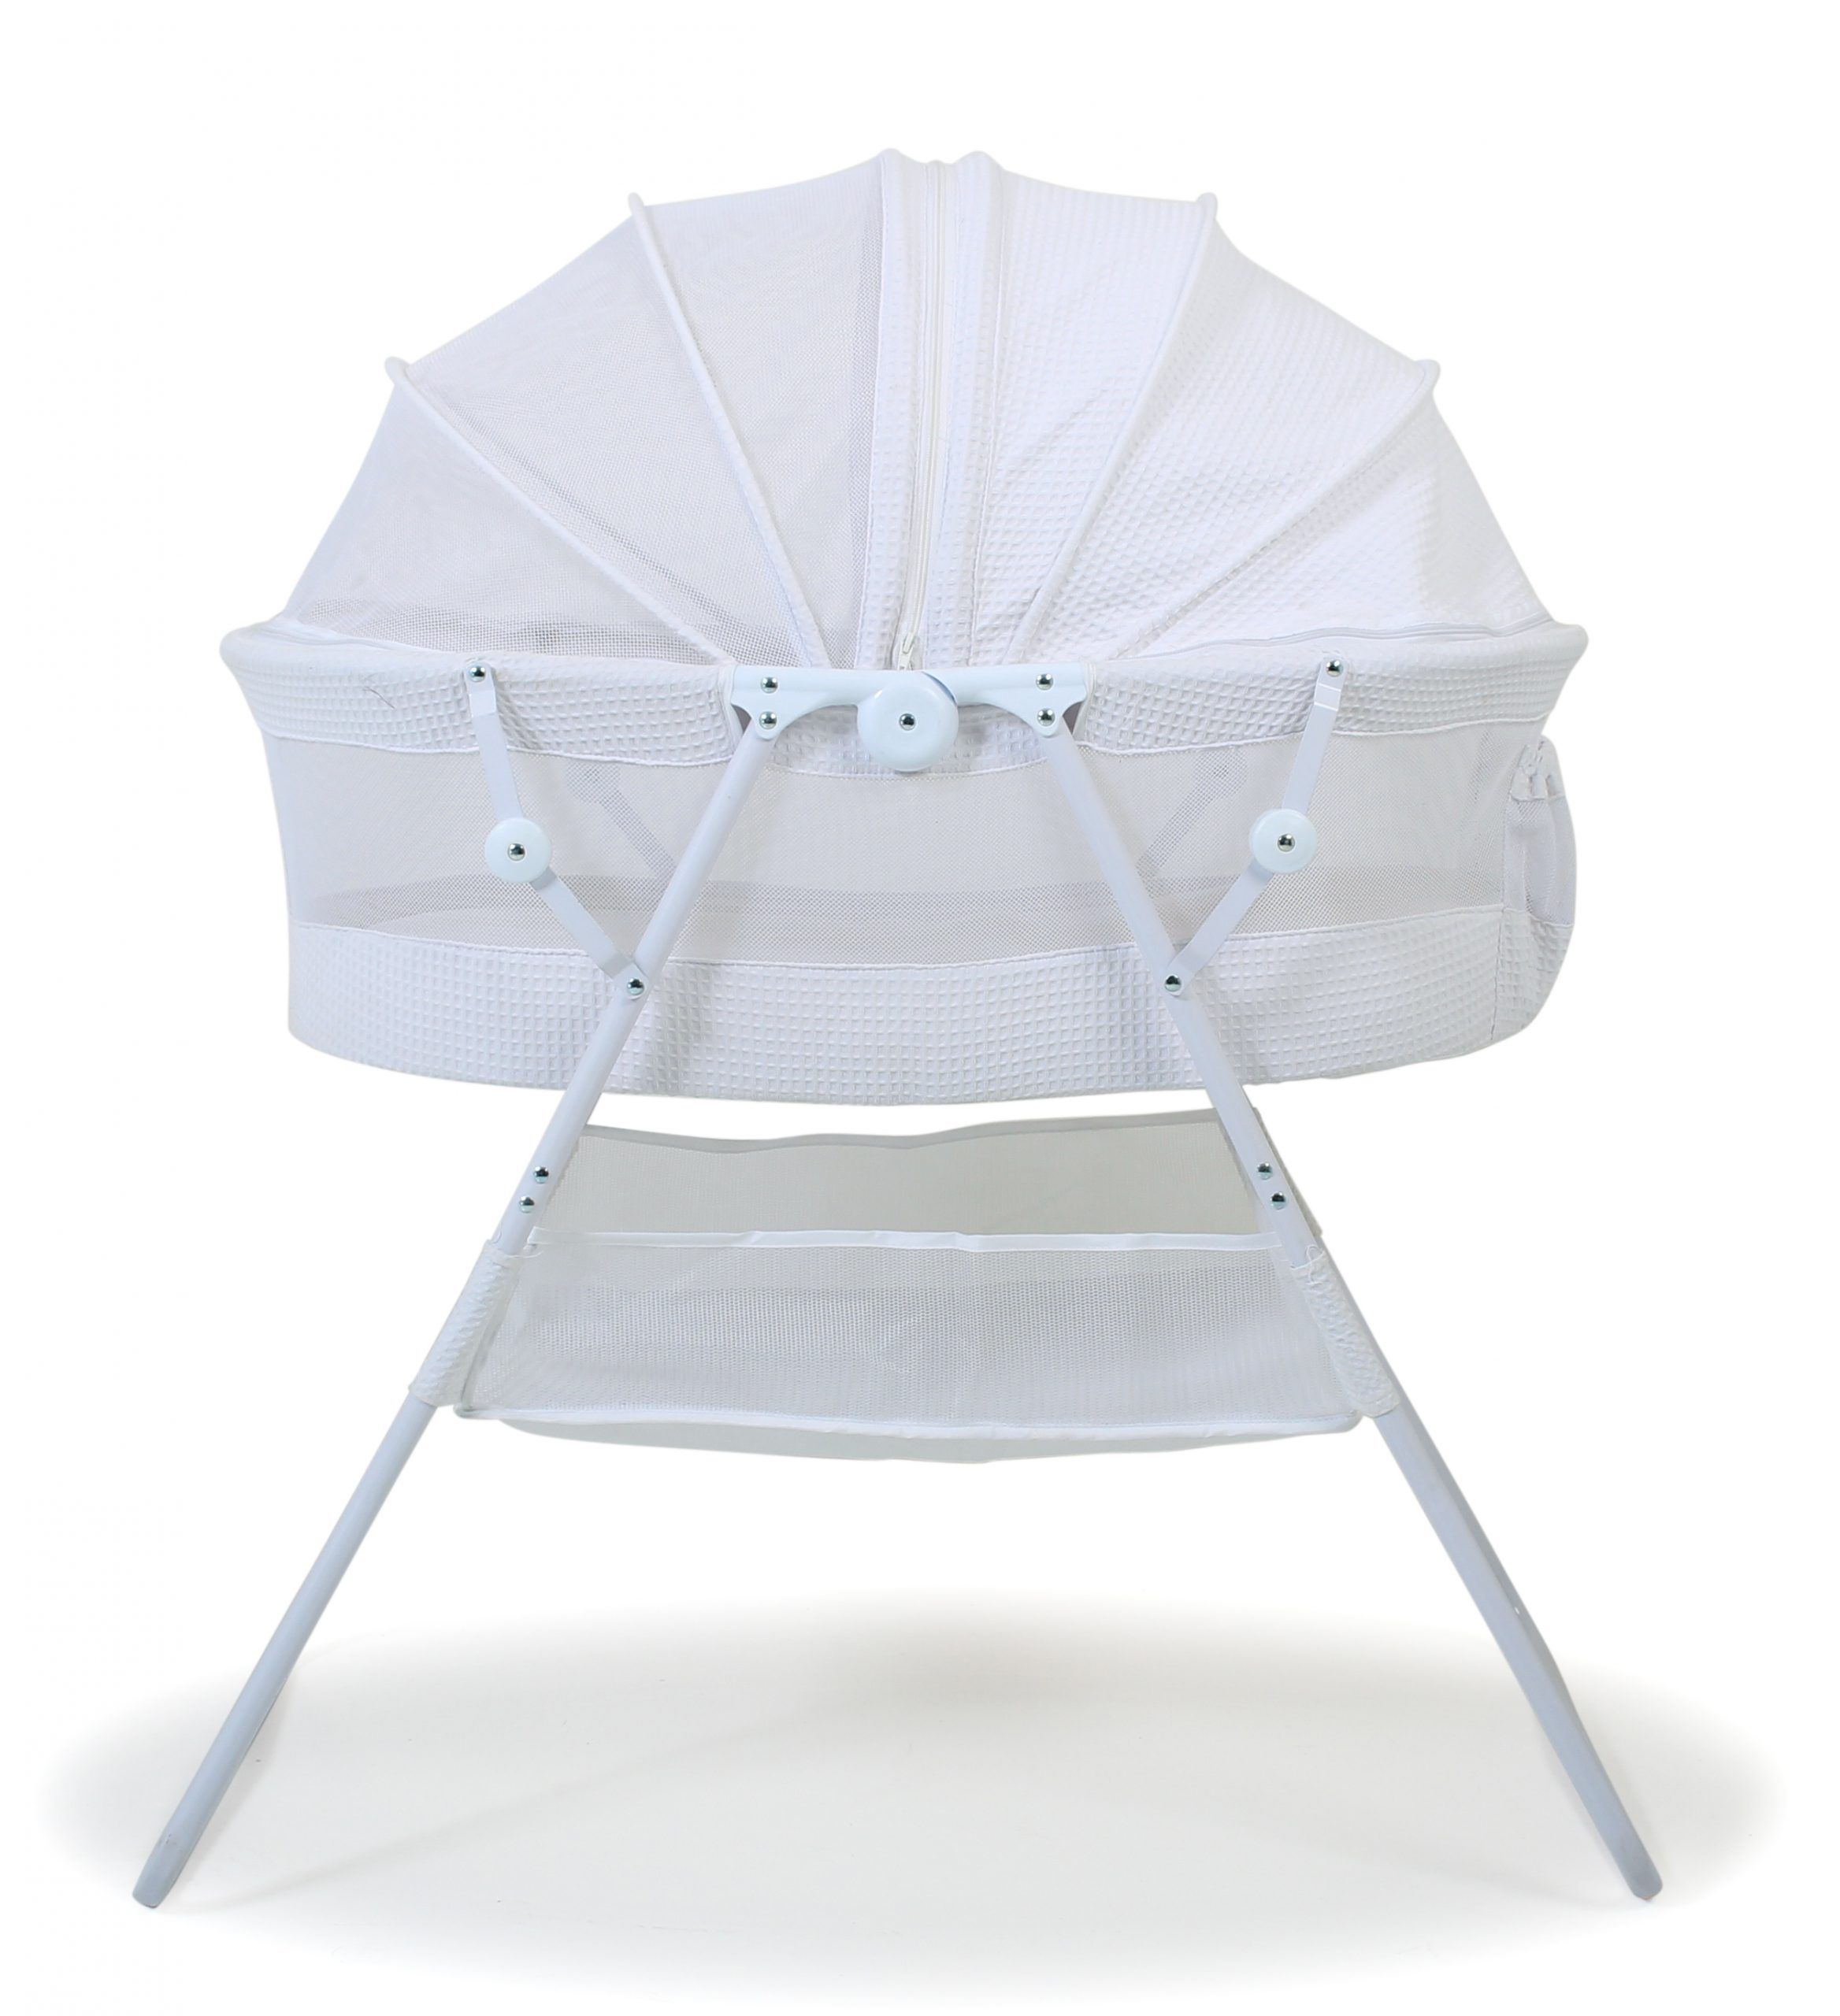 land of nod changing table